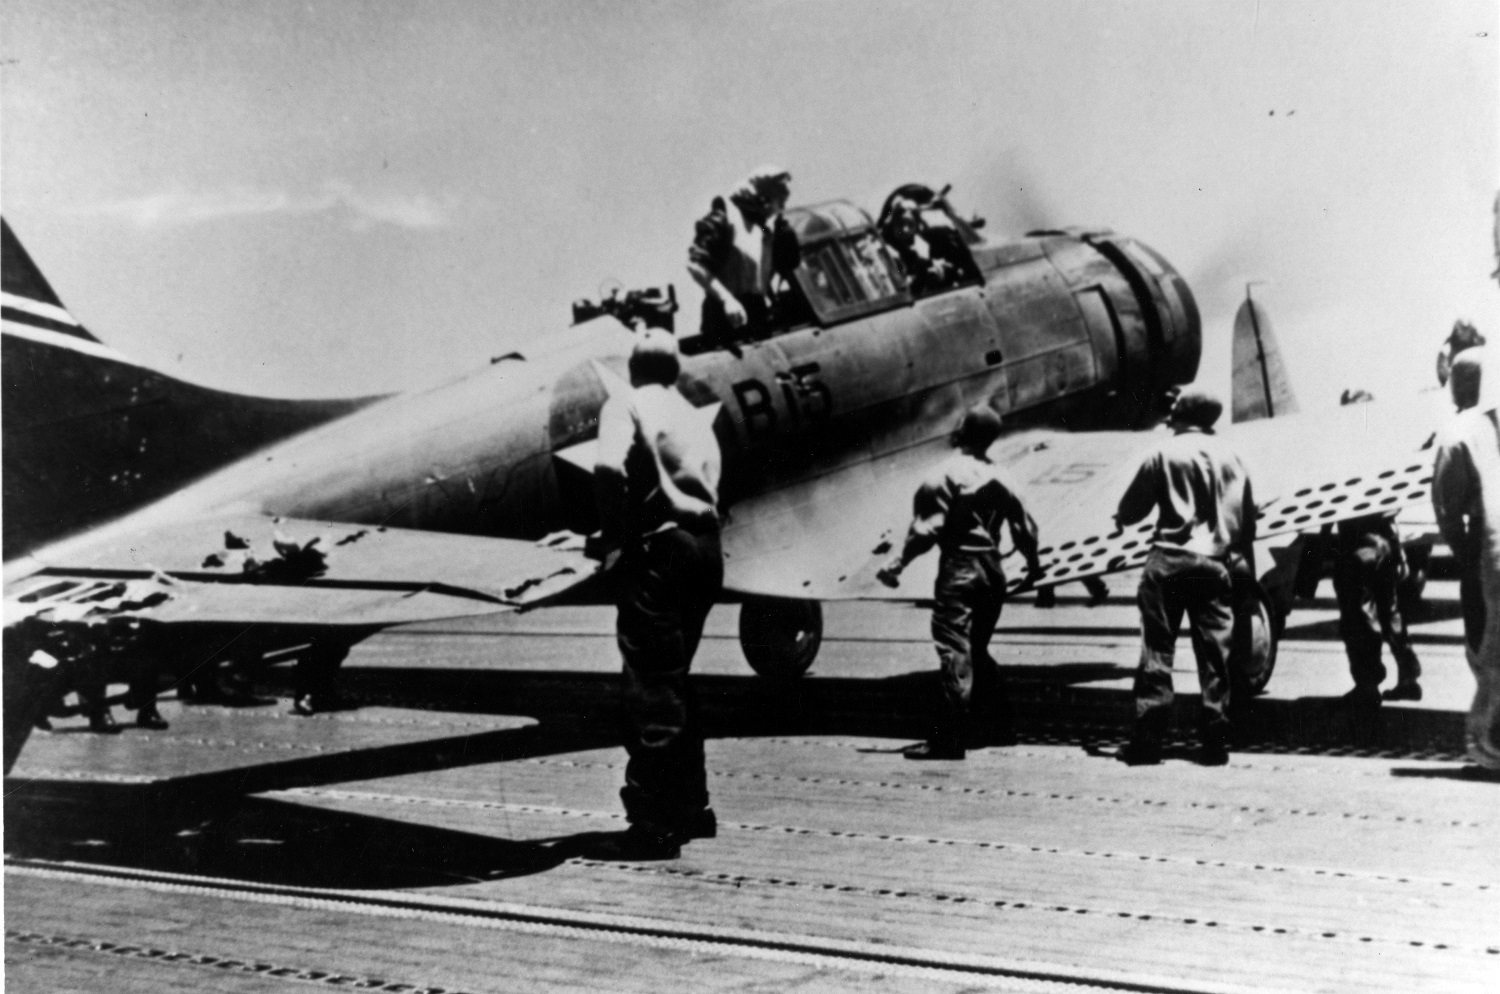 Battle of Midway, June 1942 A Douglas SBD-3 Dauntless scout bomber (Bureau # 4542), of USS Enterprise's Bombing Squadron Six (VB-6), on USS Yorktown (CV-5) after landing at about 1140 hrs on 4 June 1942. This plane, damaged during the attack on the Japanese aircraft carrier Kaga that morning, landed on Yorktown as it was low on fuel. It was later lost with the carrier. Its crew, Ensign George H. Goldsmith, pilot, and Radioman 1st Class James W. Patterson, Jr., are still in the cockpit. Note damage to the horizontal tail. Courtesy of Kent Walters and Robert J. Cressman. 